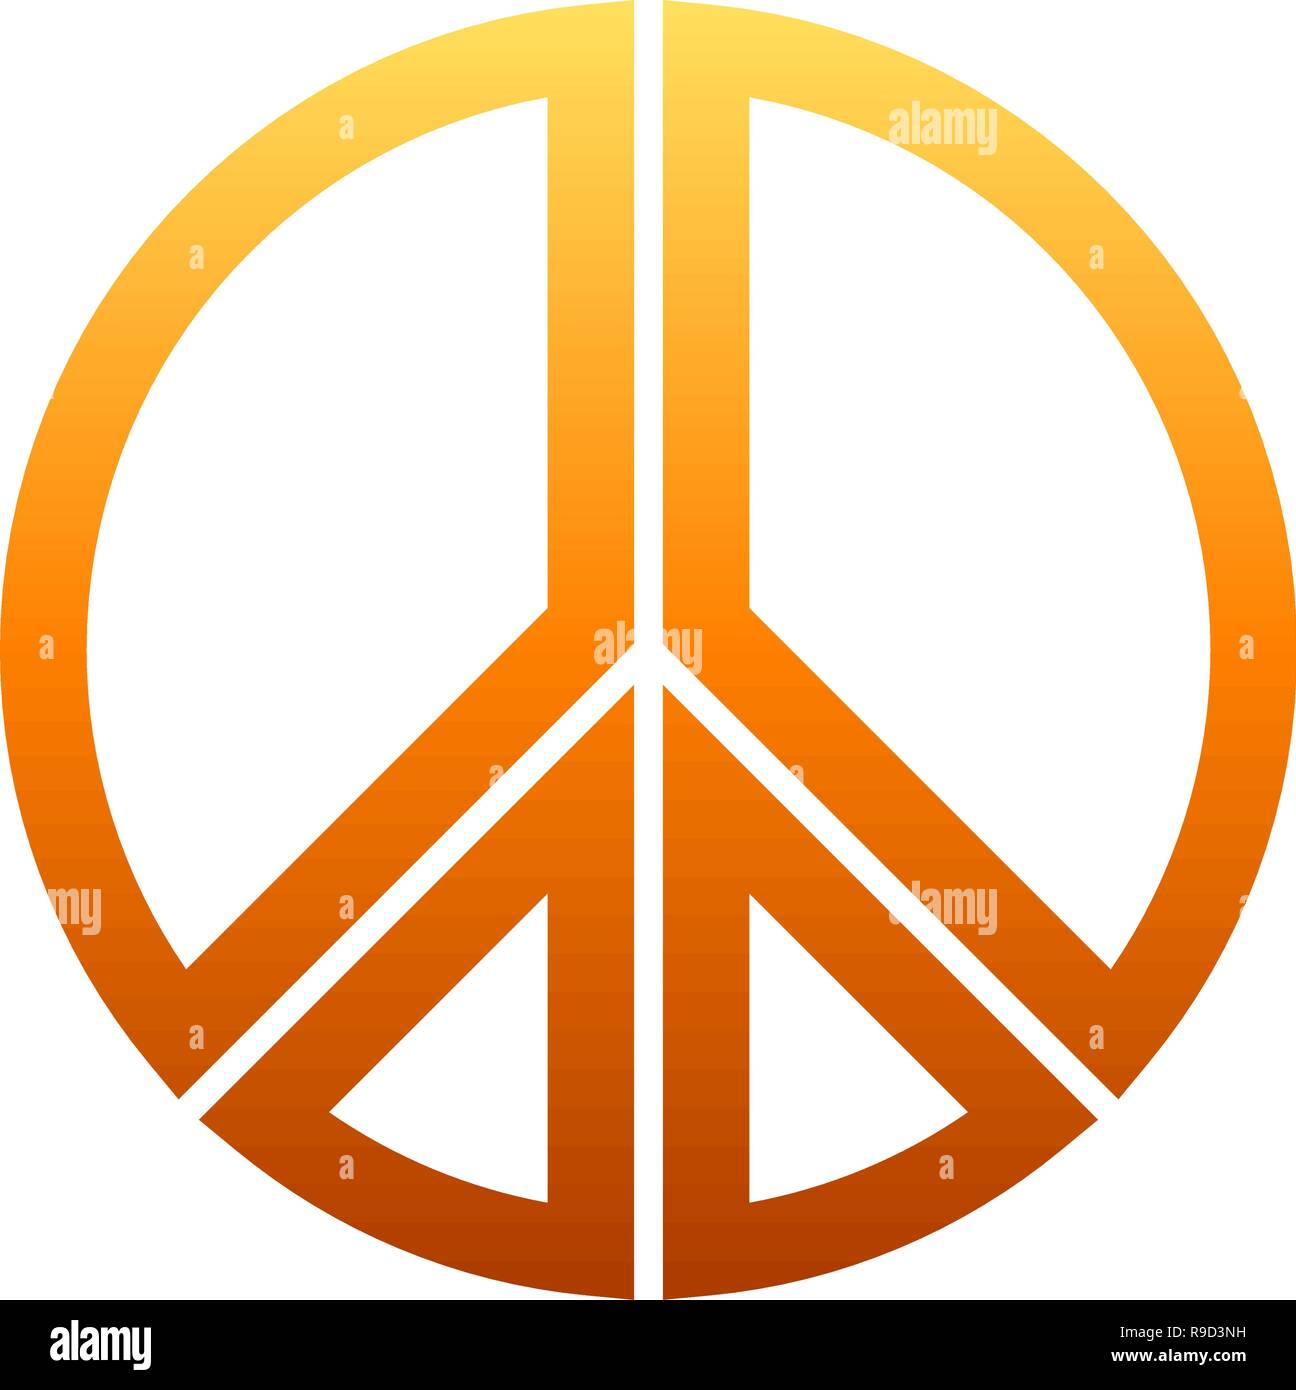 Peace symbol icon - orange simple gradient, segmented outlined shapes ...